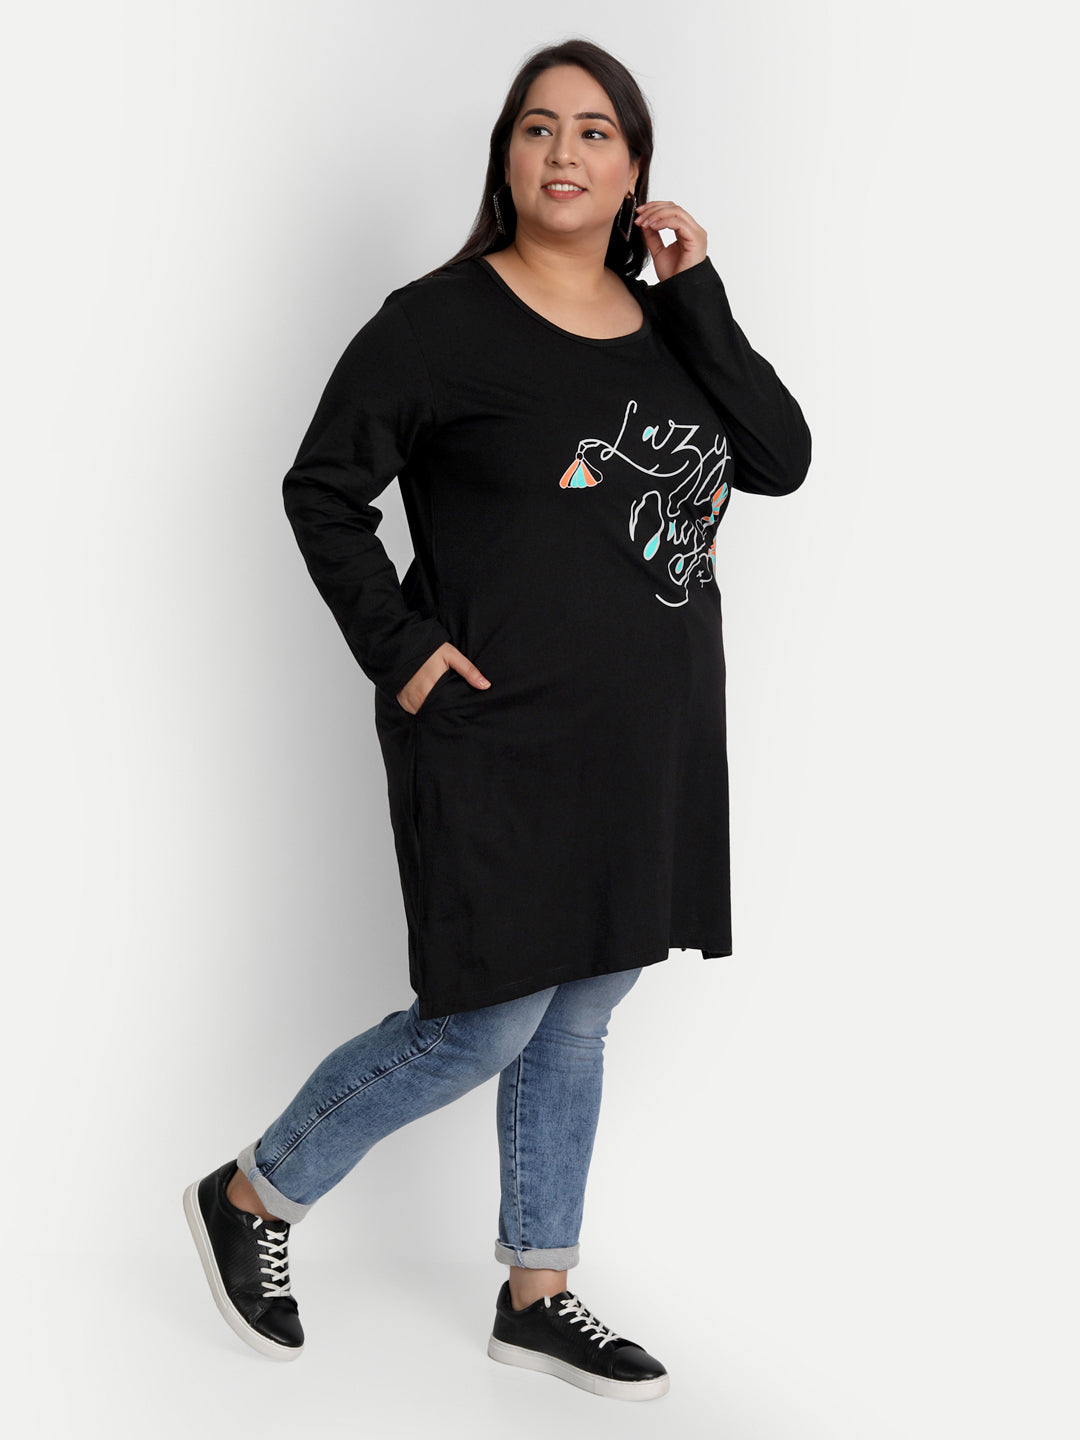 Cotton Long Top for Women Plus Size - Full Sleeve - Black